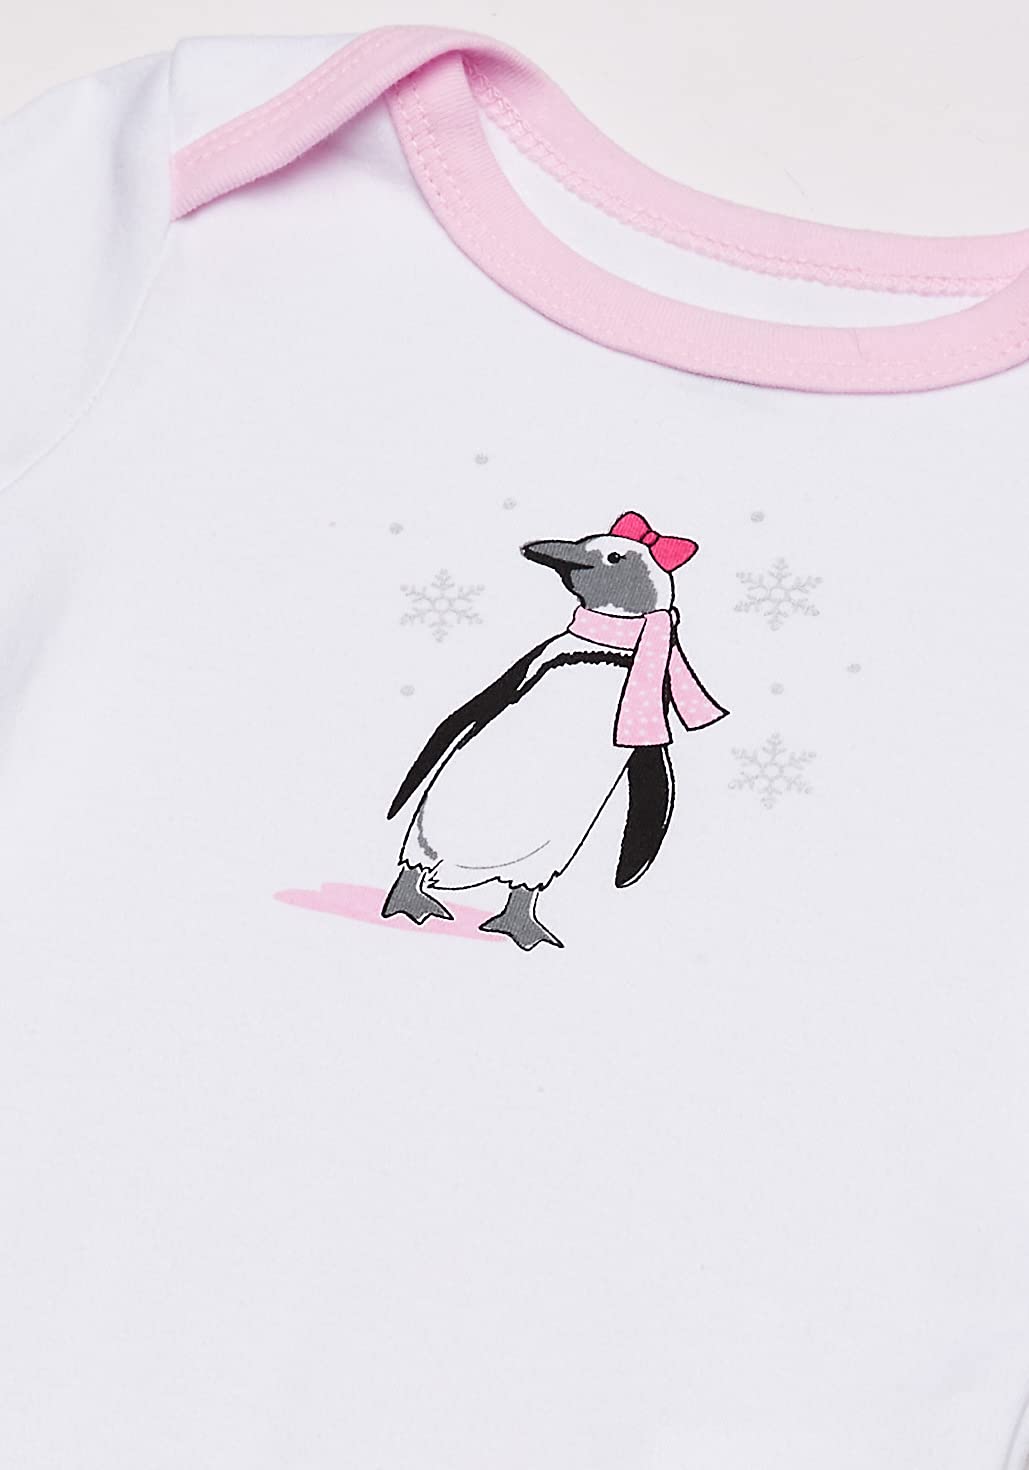 Hudson Baby Unisex Baby Cotton Long-sleeve Bodysuits, Pink Penguin, 12-18 Months US